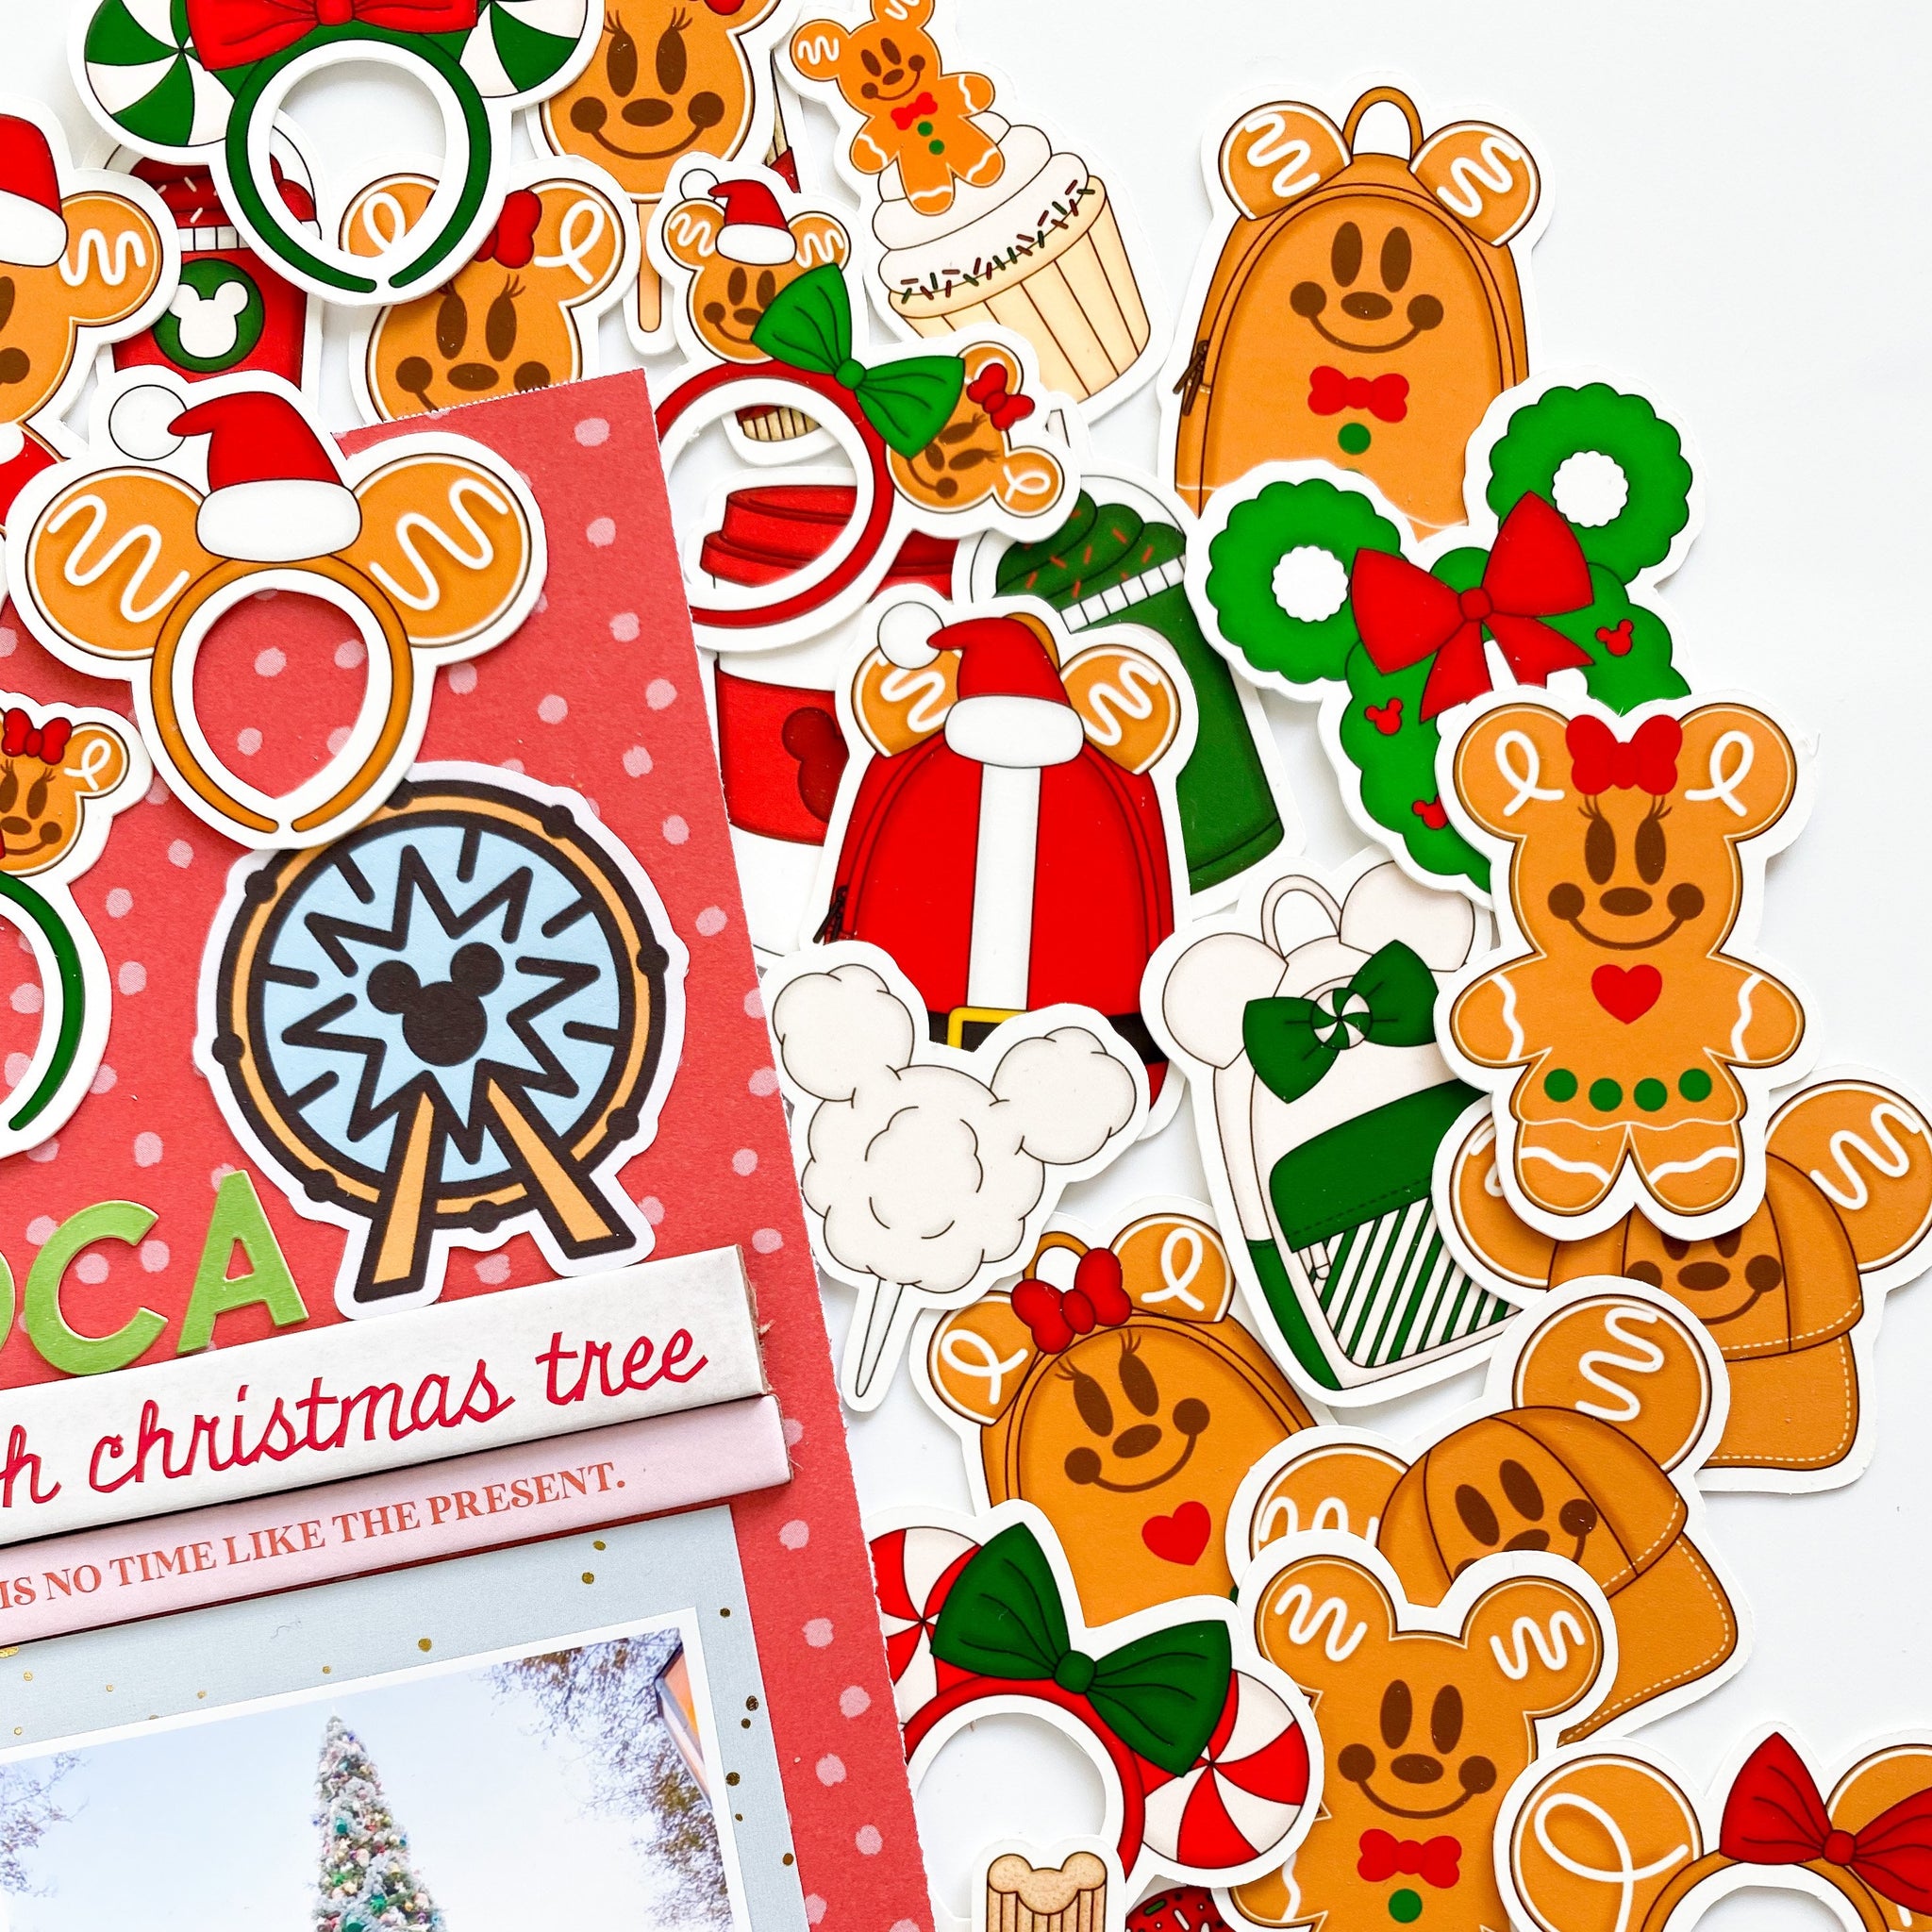 Gingerbread party mix, ephemera for DIY Christmas crafts, Christmas handmade cards, memory keeping items, Disney gingerbread cookies, Mickey Gingerbread cookie, paper crafting,